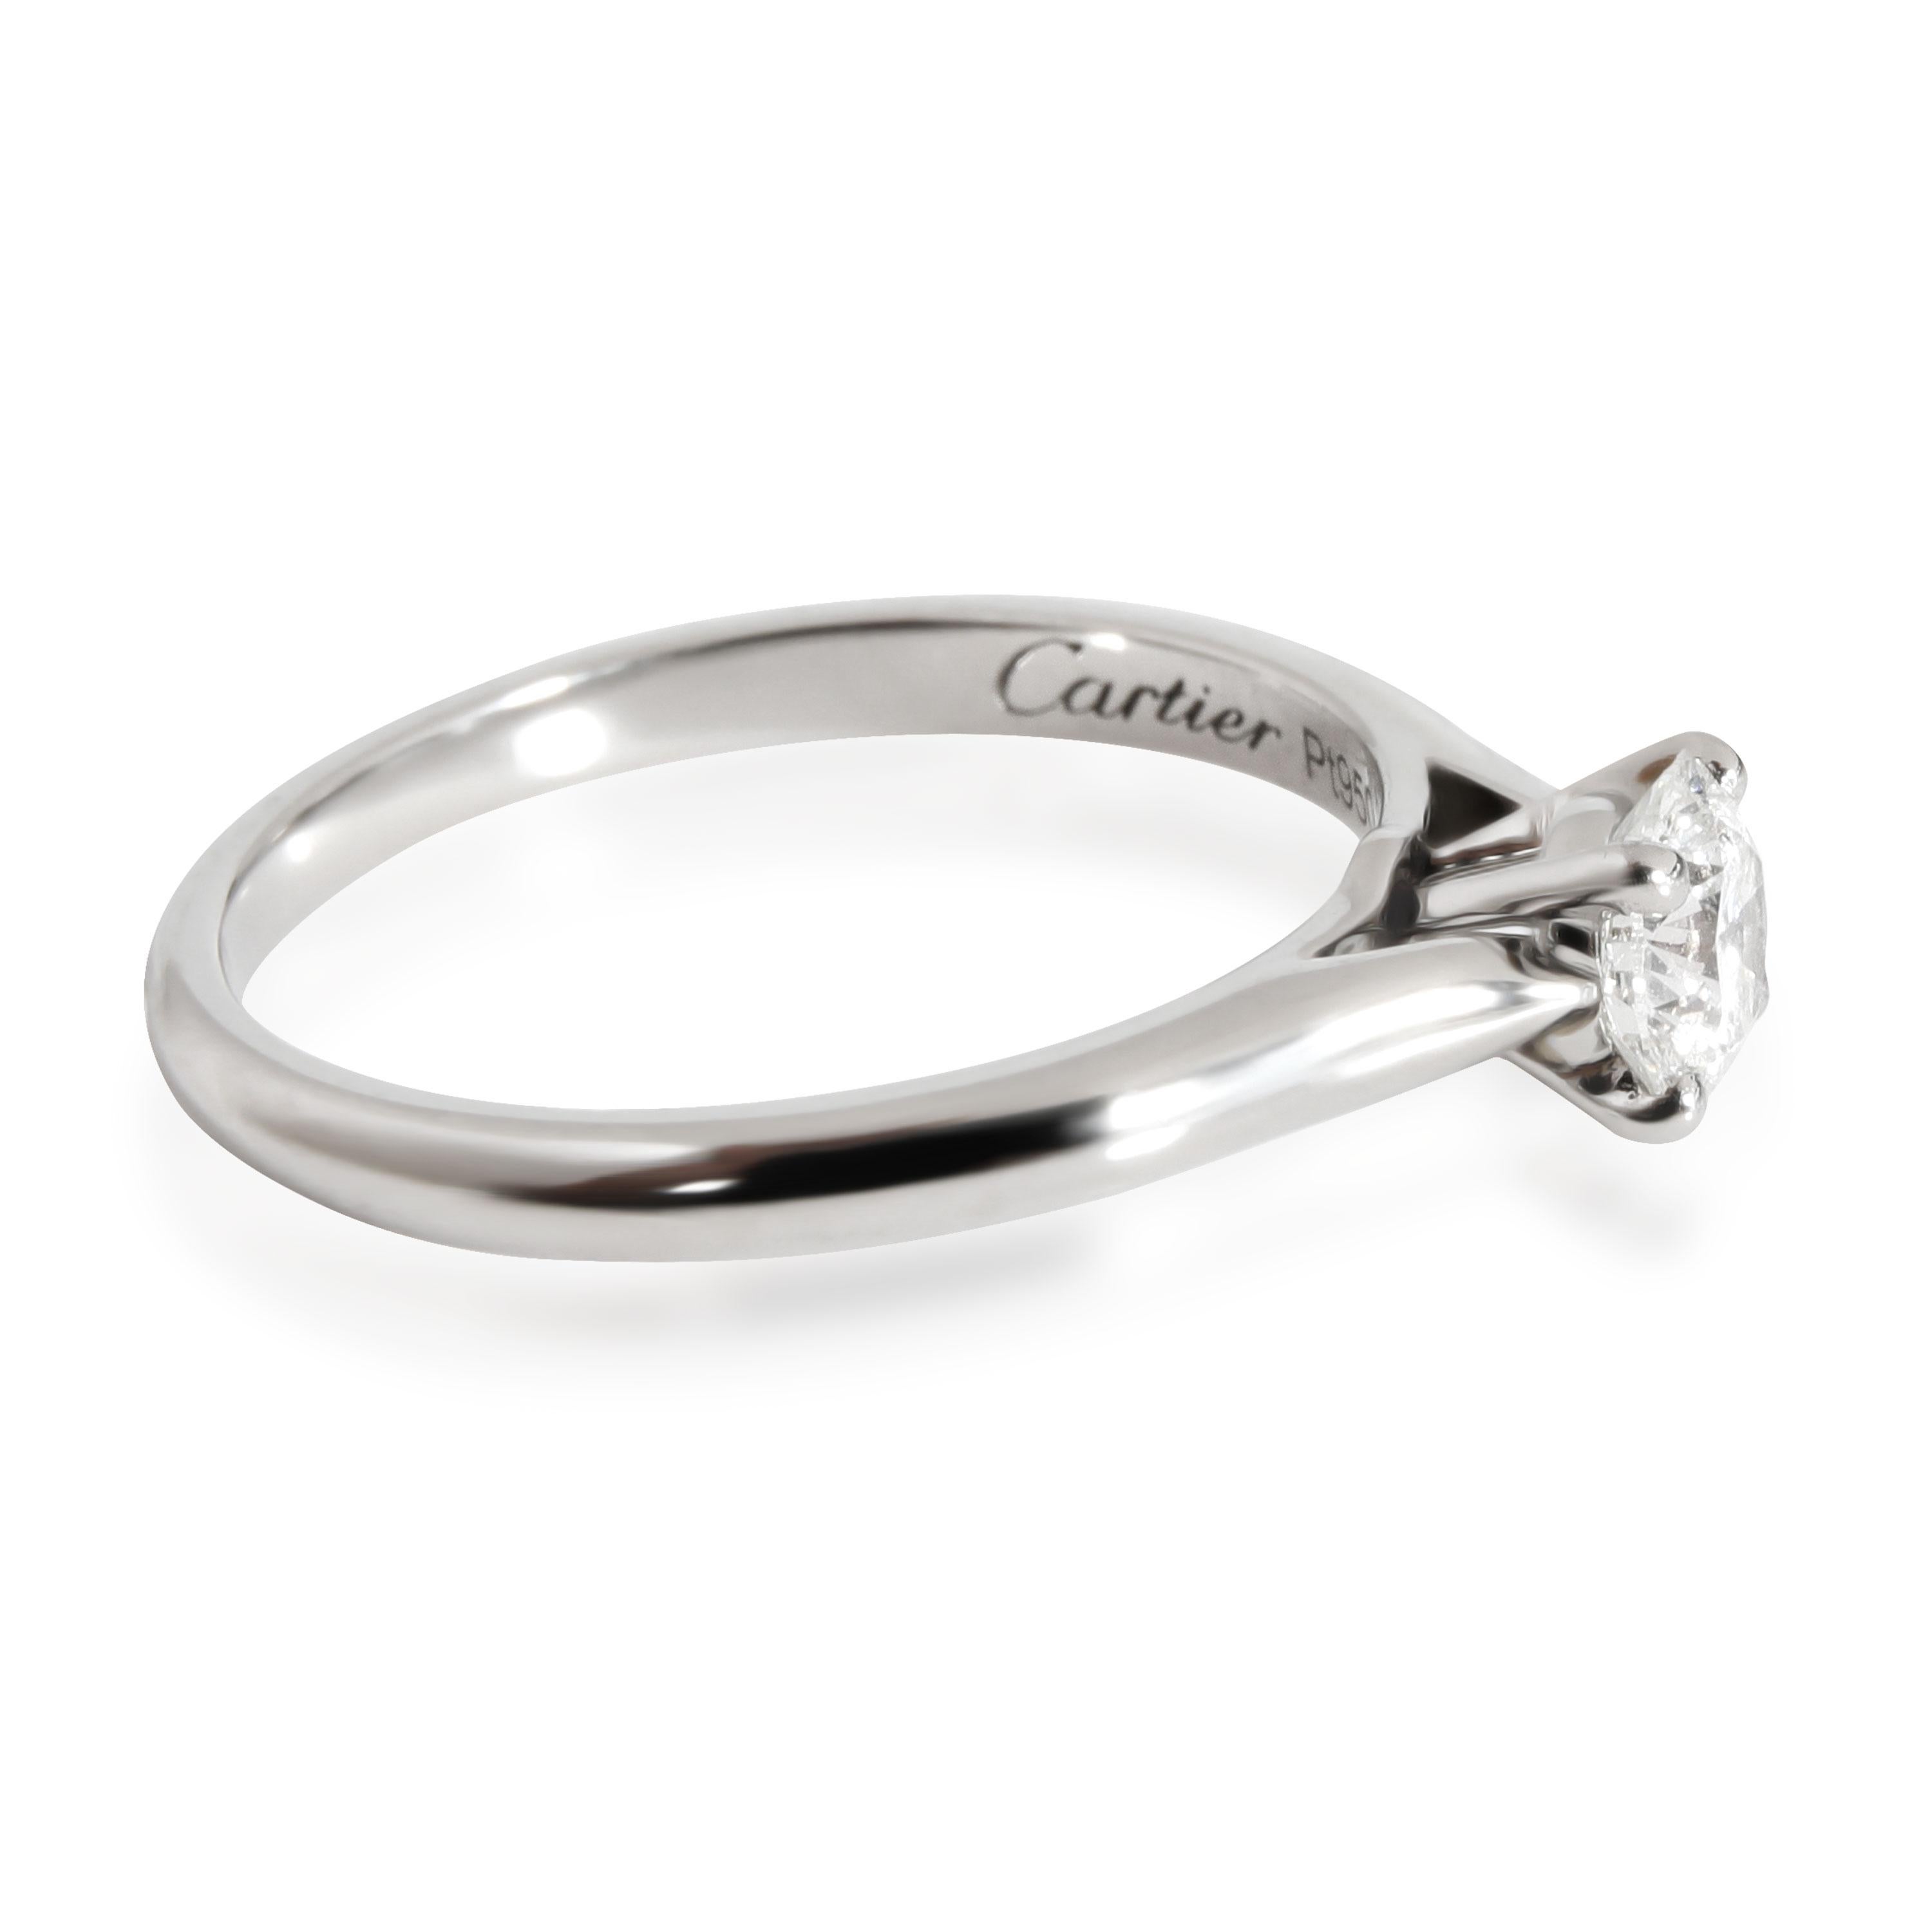 Cartier 1895 Diamond Engagement Ring in Platinum G VS1 0.35 CTW In Excellent Condition For Sale In New York, NY